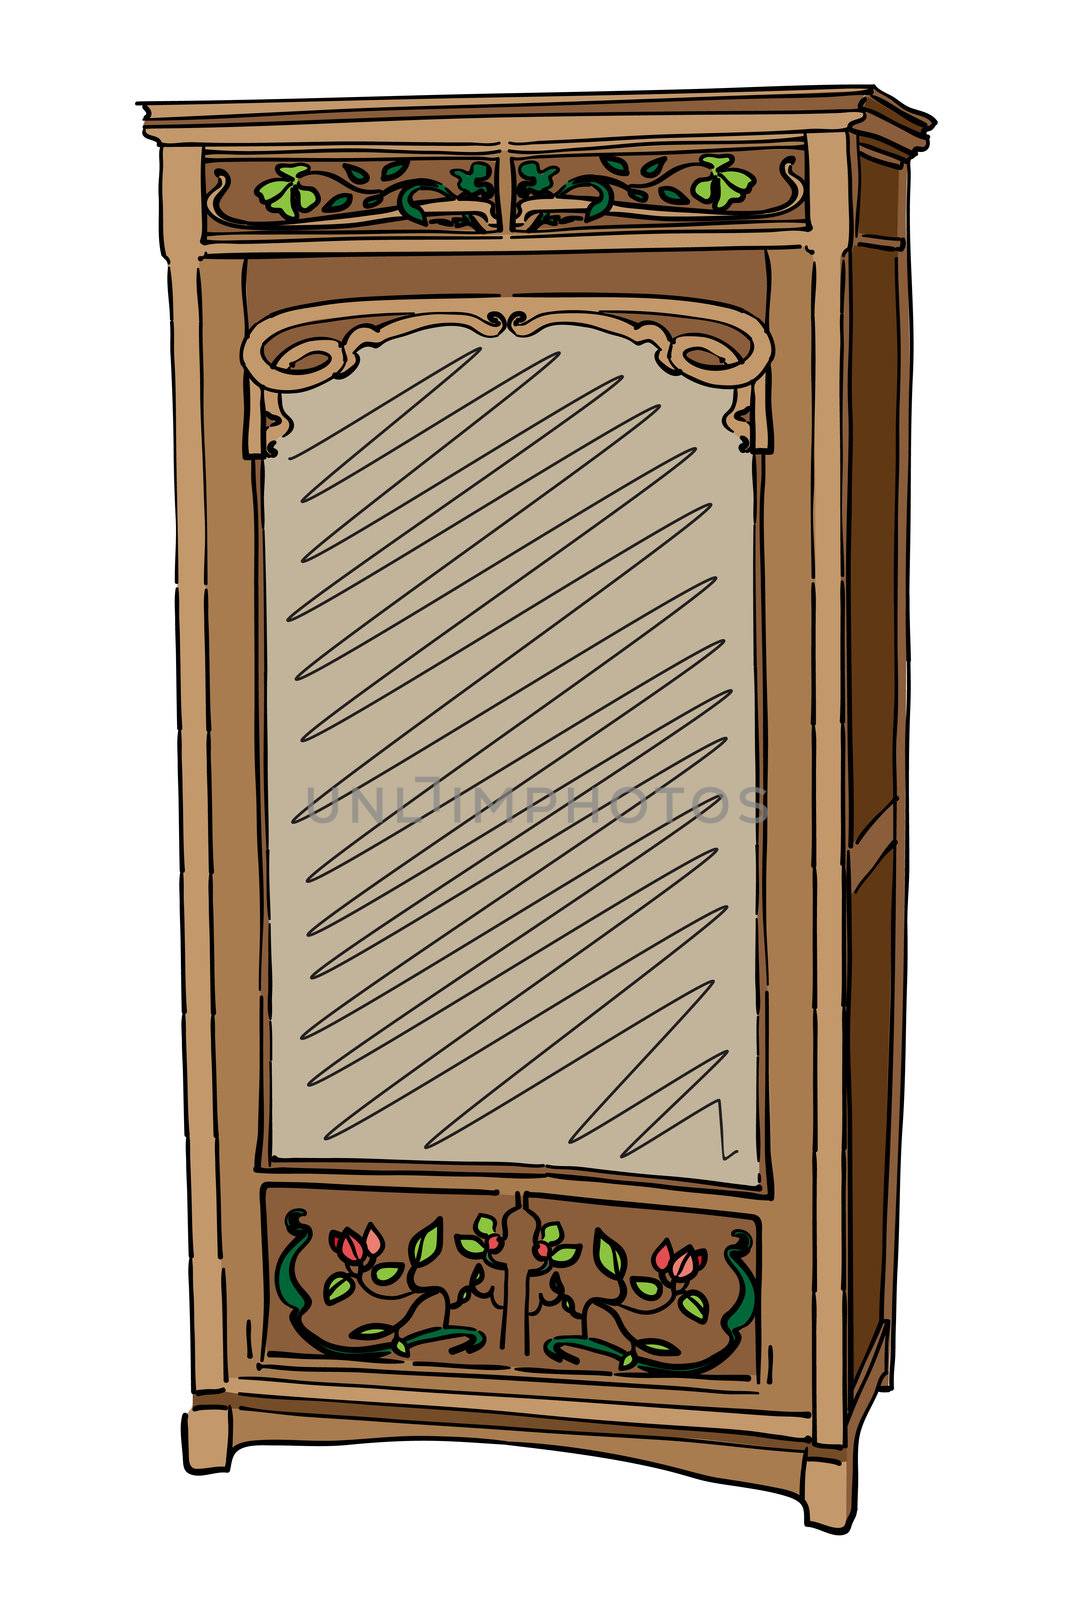 1900 style wardrobe, hand drawn colored illustration isolated on white